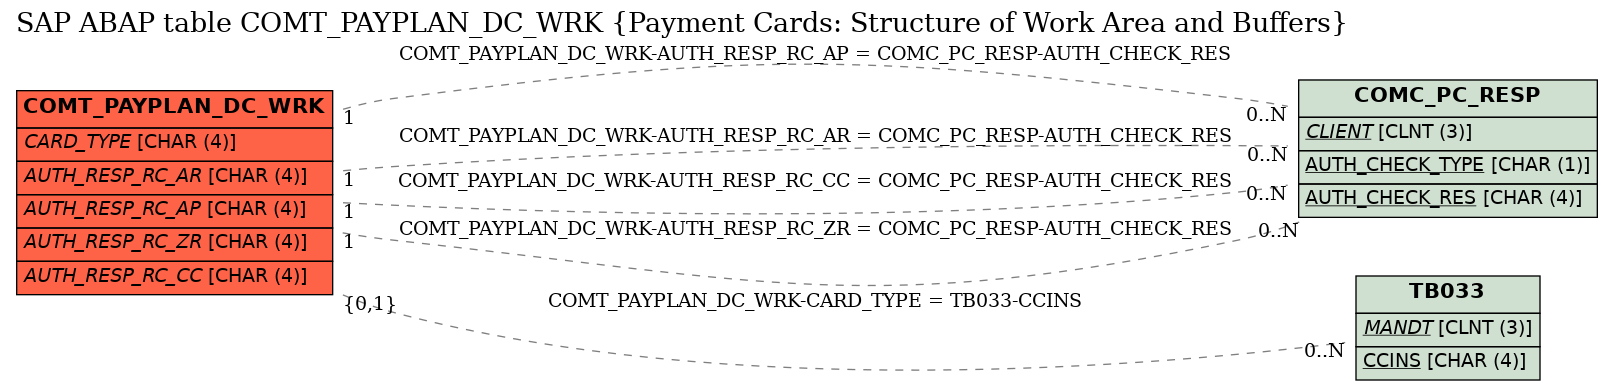 E-R Diagram for table COMT_PAYPLAN_DC_WRK (Payment Cards: Structure of Work Area and Buffers)